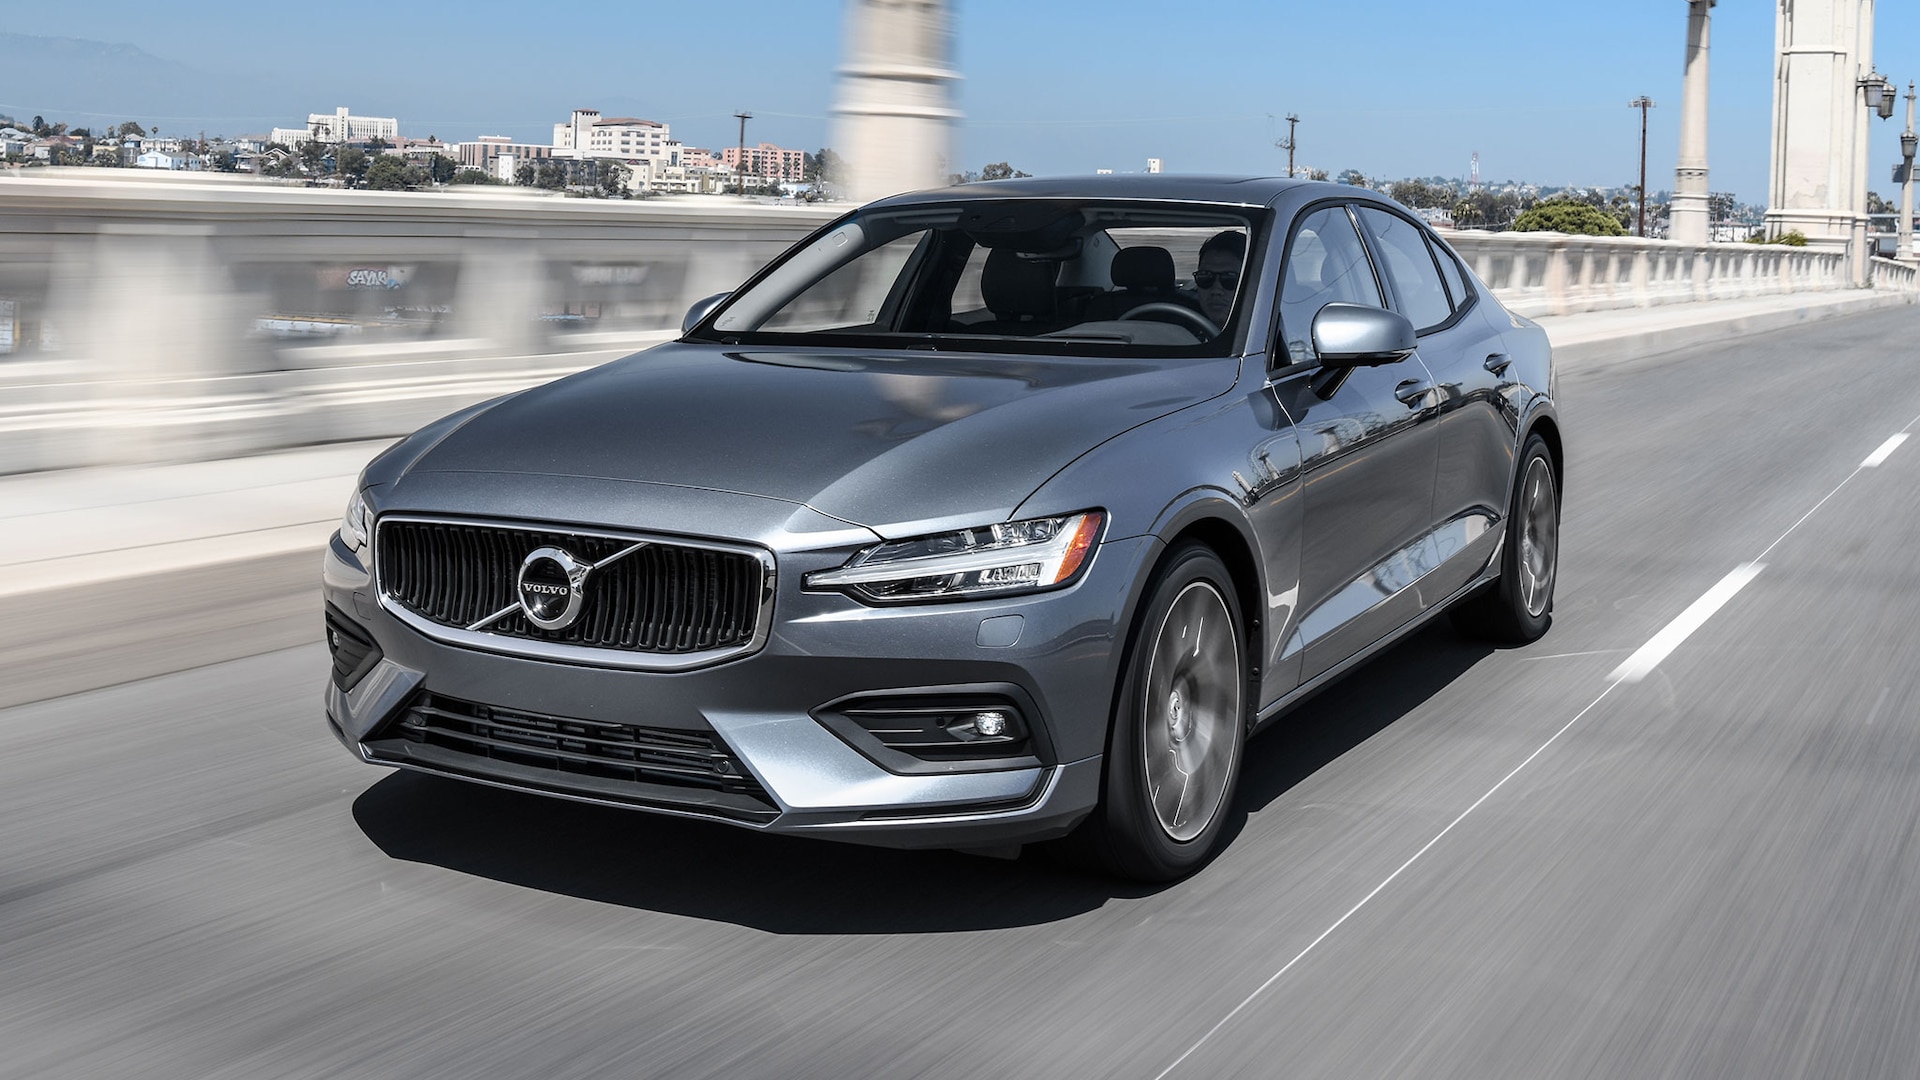 2019 Volvo S60 T6 Momentum Review: One Year With Volvo's Luxury Sport Sedan